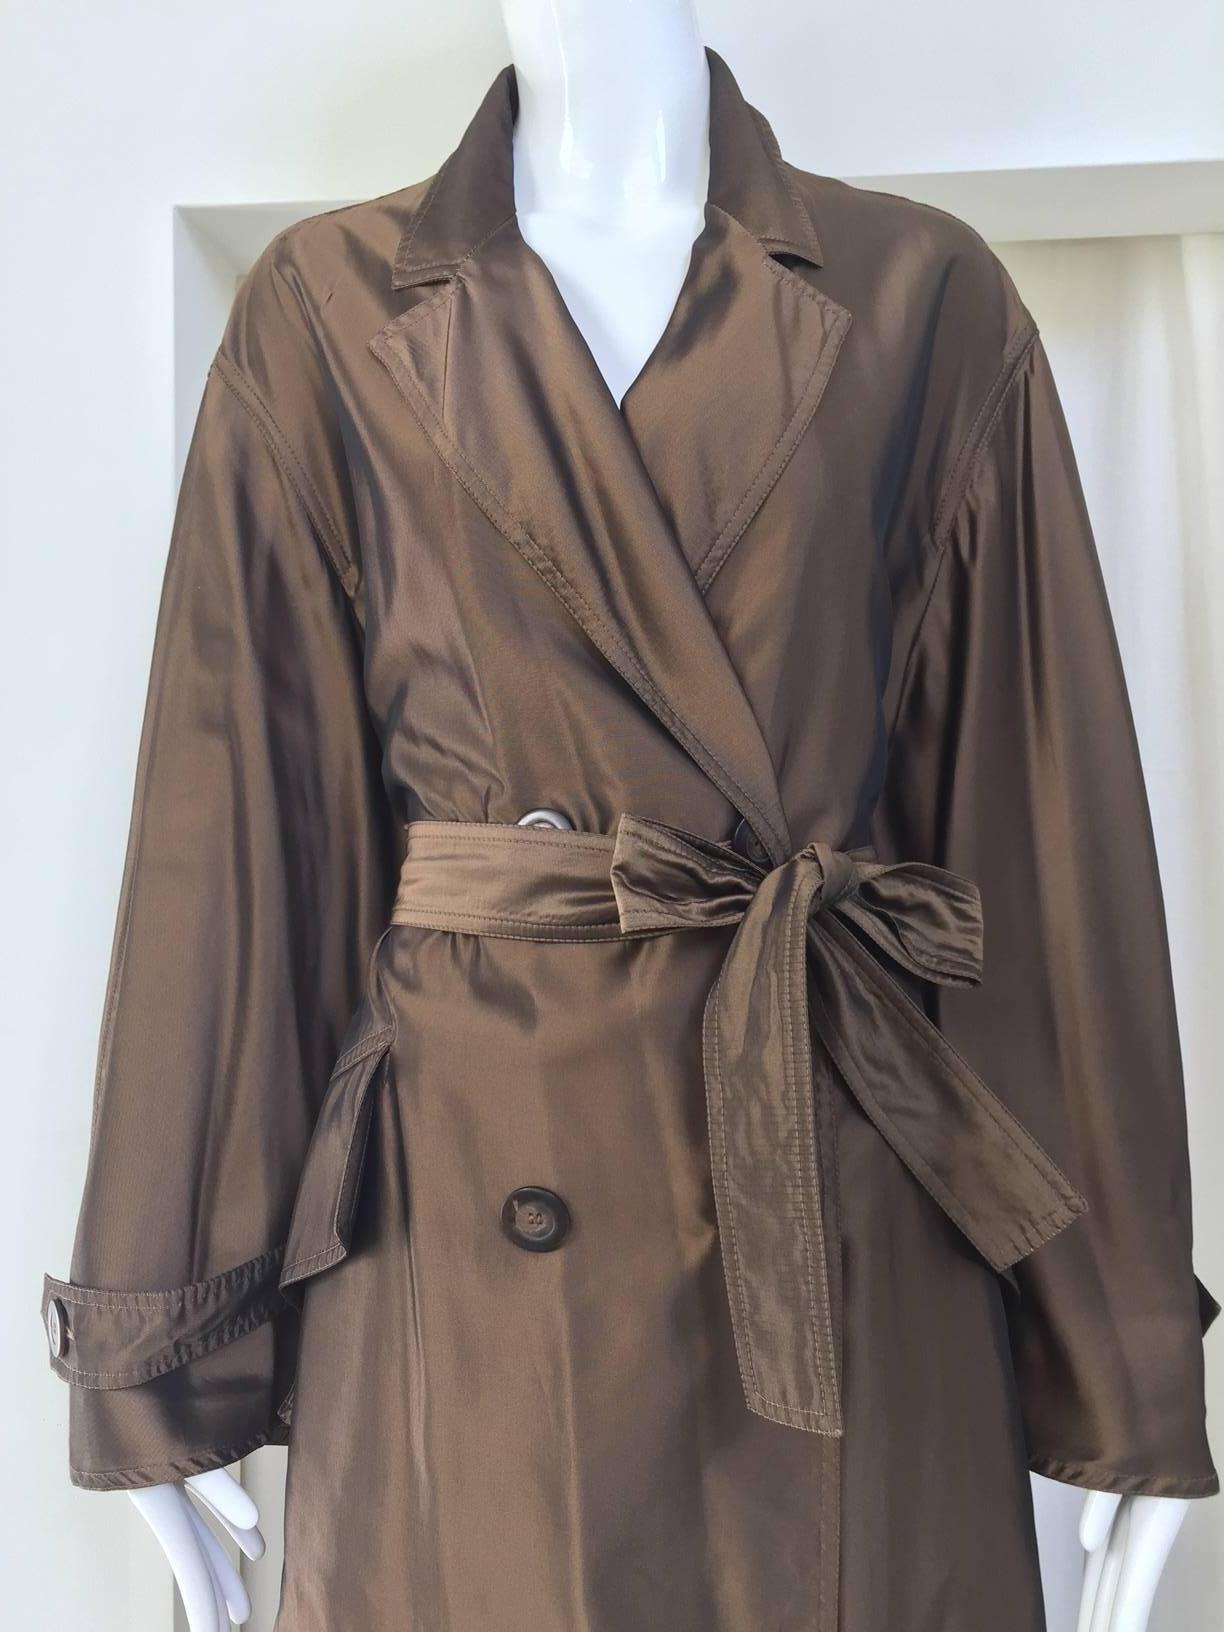 1980s KRIZIA POI bronze silk light trench coat.
Double breasted with sash.
Fit size 2/4/6/8
 